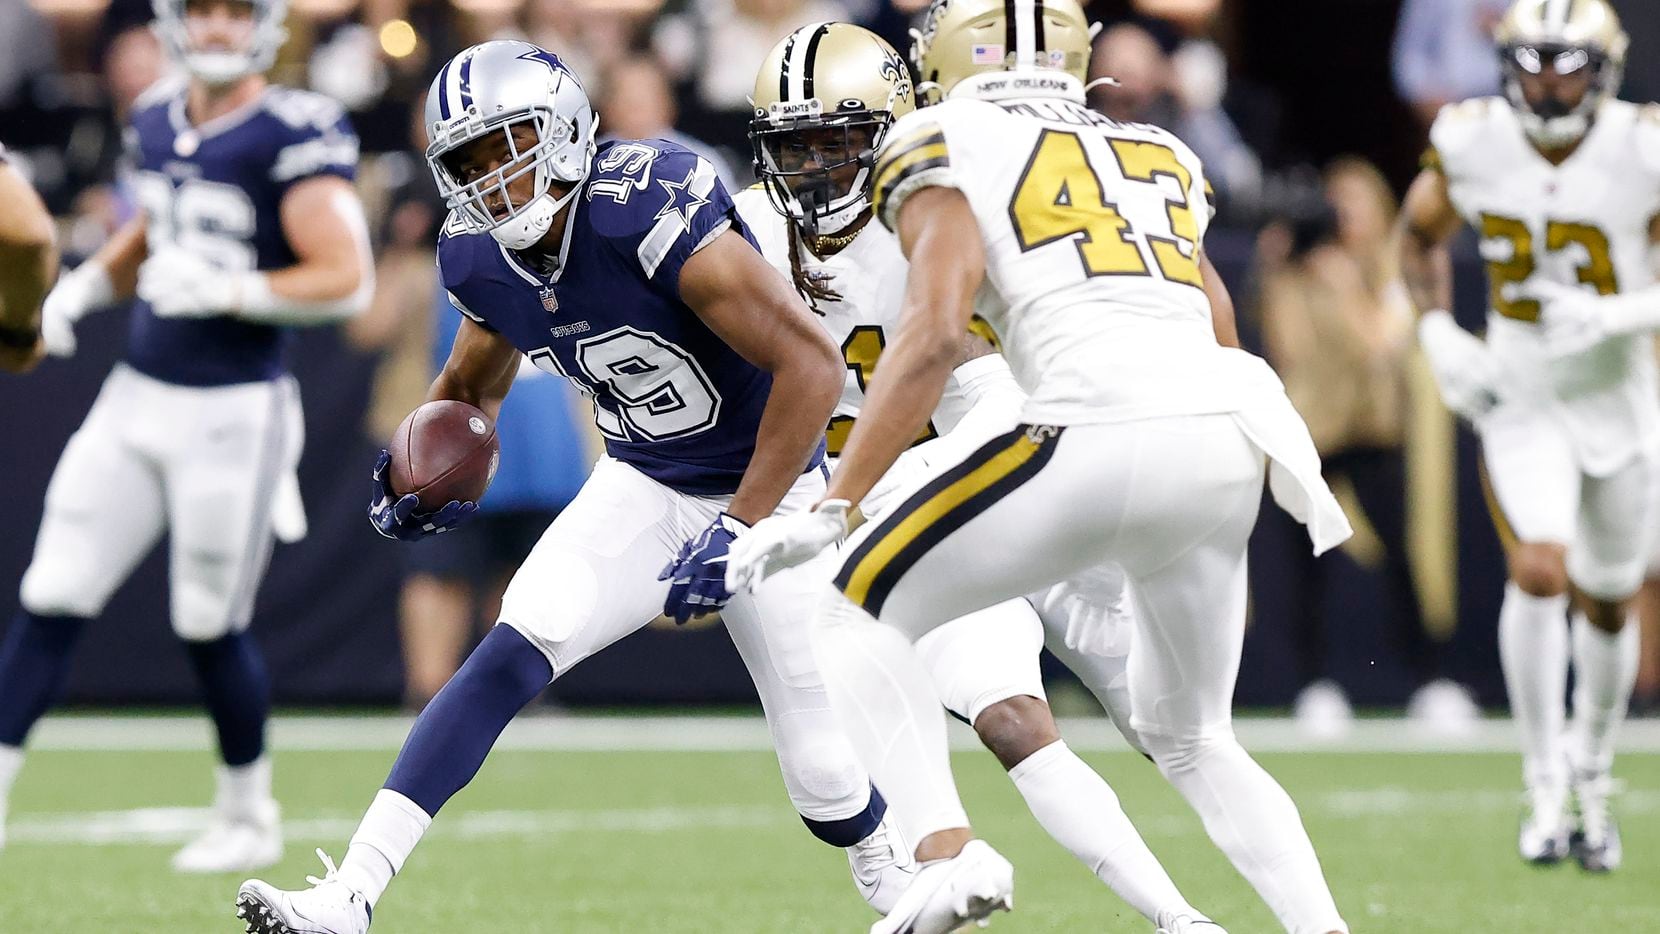 Dallas Cowboys wide receiver Amari Cooper (19) makes a move on New Orleans Saints free safety Marcus Williams (43) after a big first-quarter completion at the Caesars Superdome in New Orleans, Louisiana December 2, 2021.